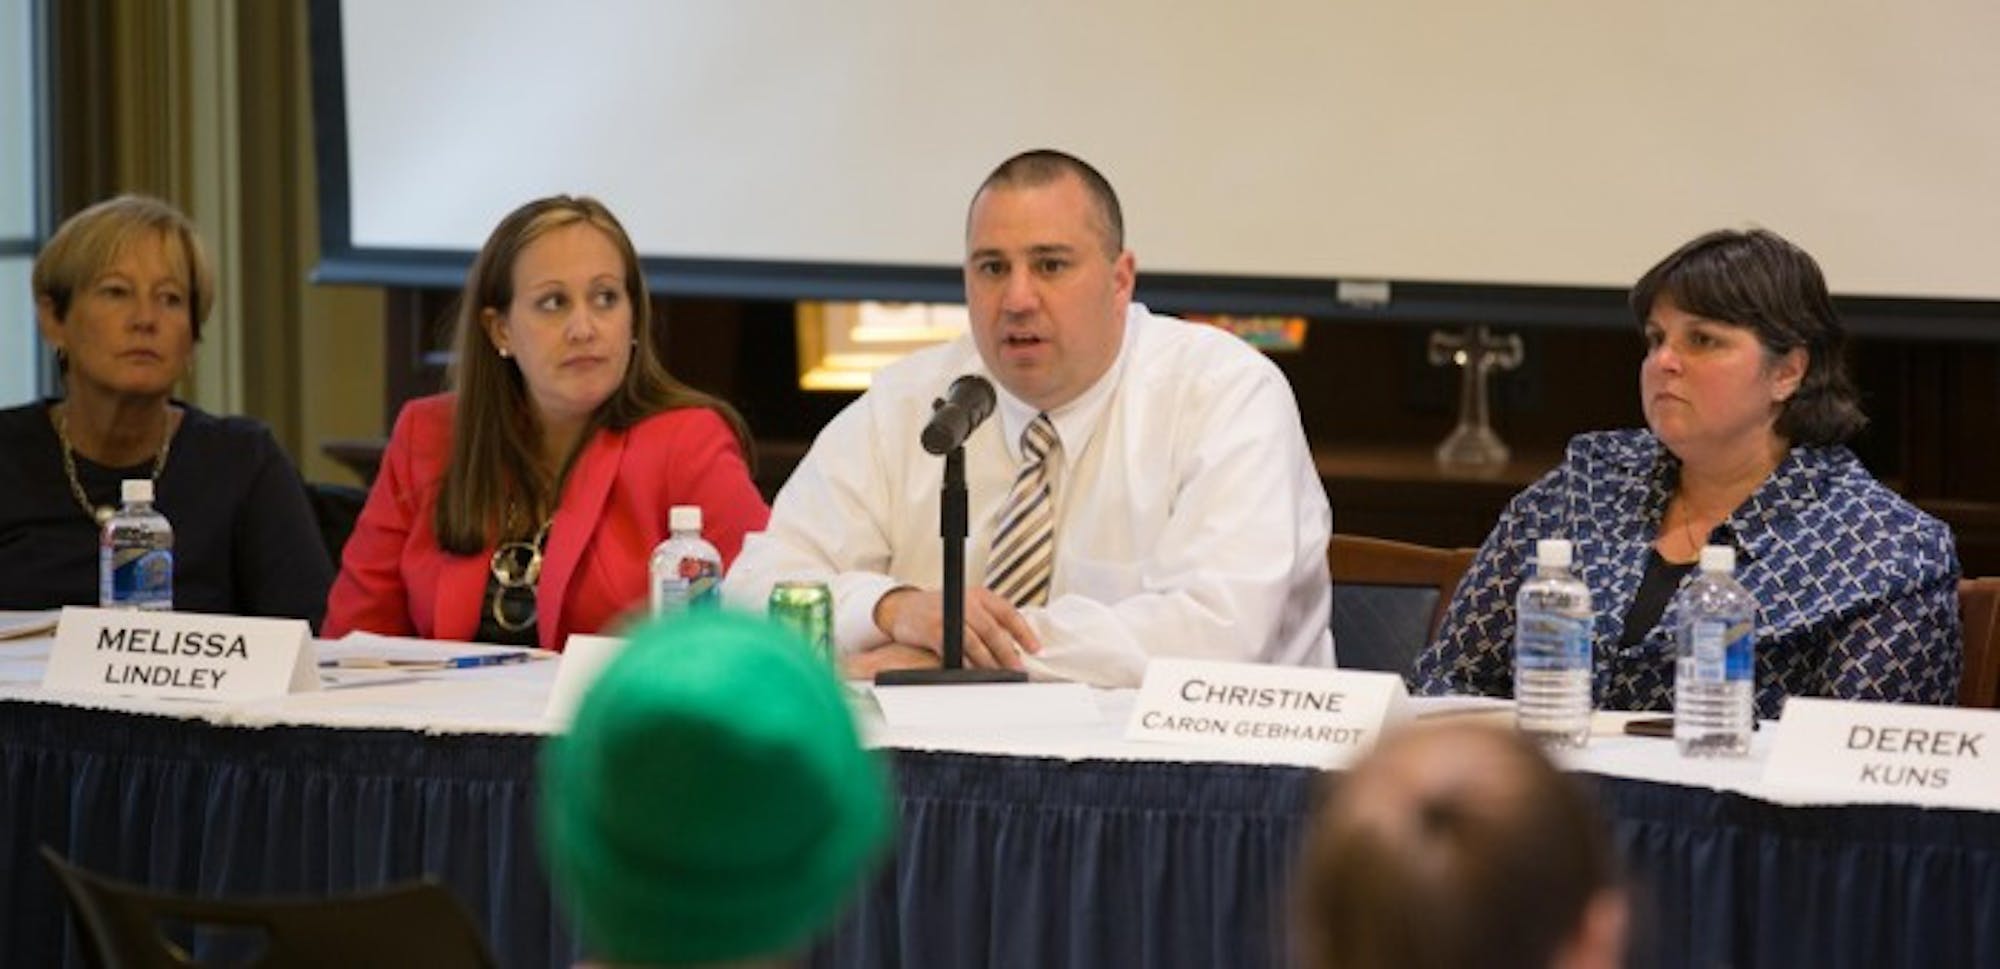 Ryan Willerton, director of the Office of Community Standards, speaks at a Monday panel on